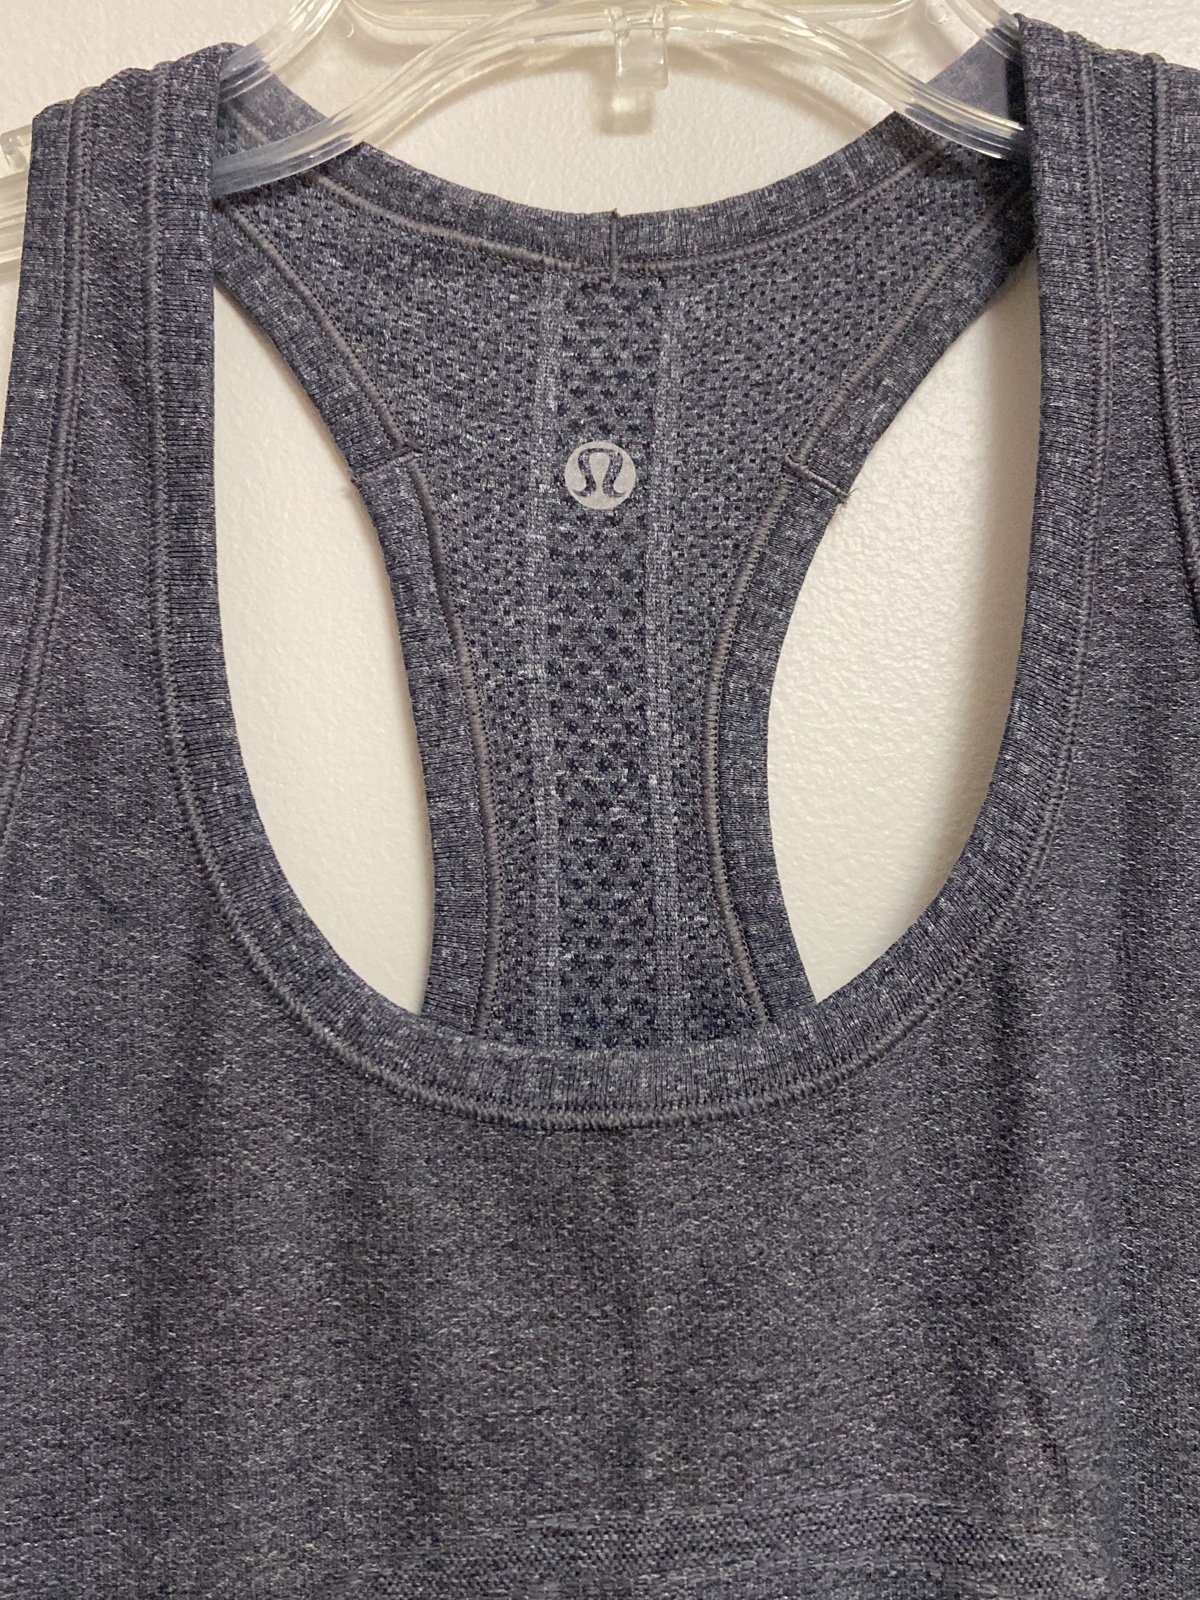 Beautiful Lululemon Tank Top LTwvQqWg0 all for you